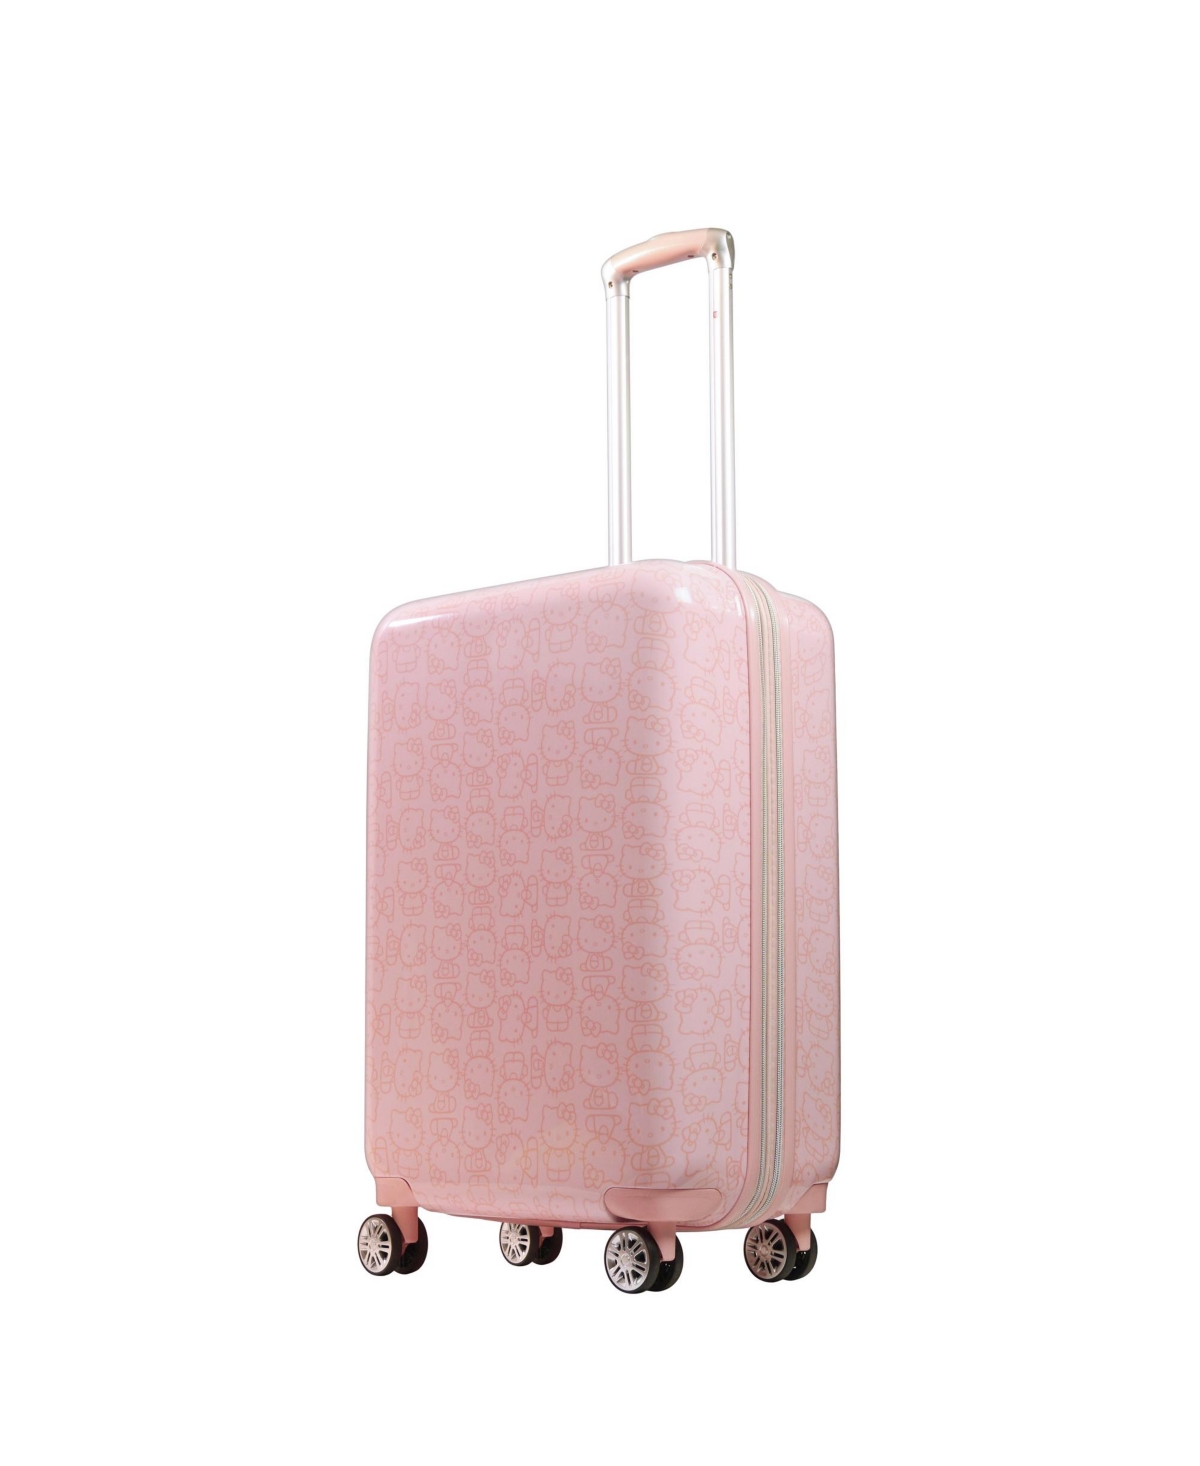 Hello Kitty Pose All Over Print 25" Hard-Sided Luggage - Pink